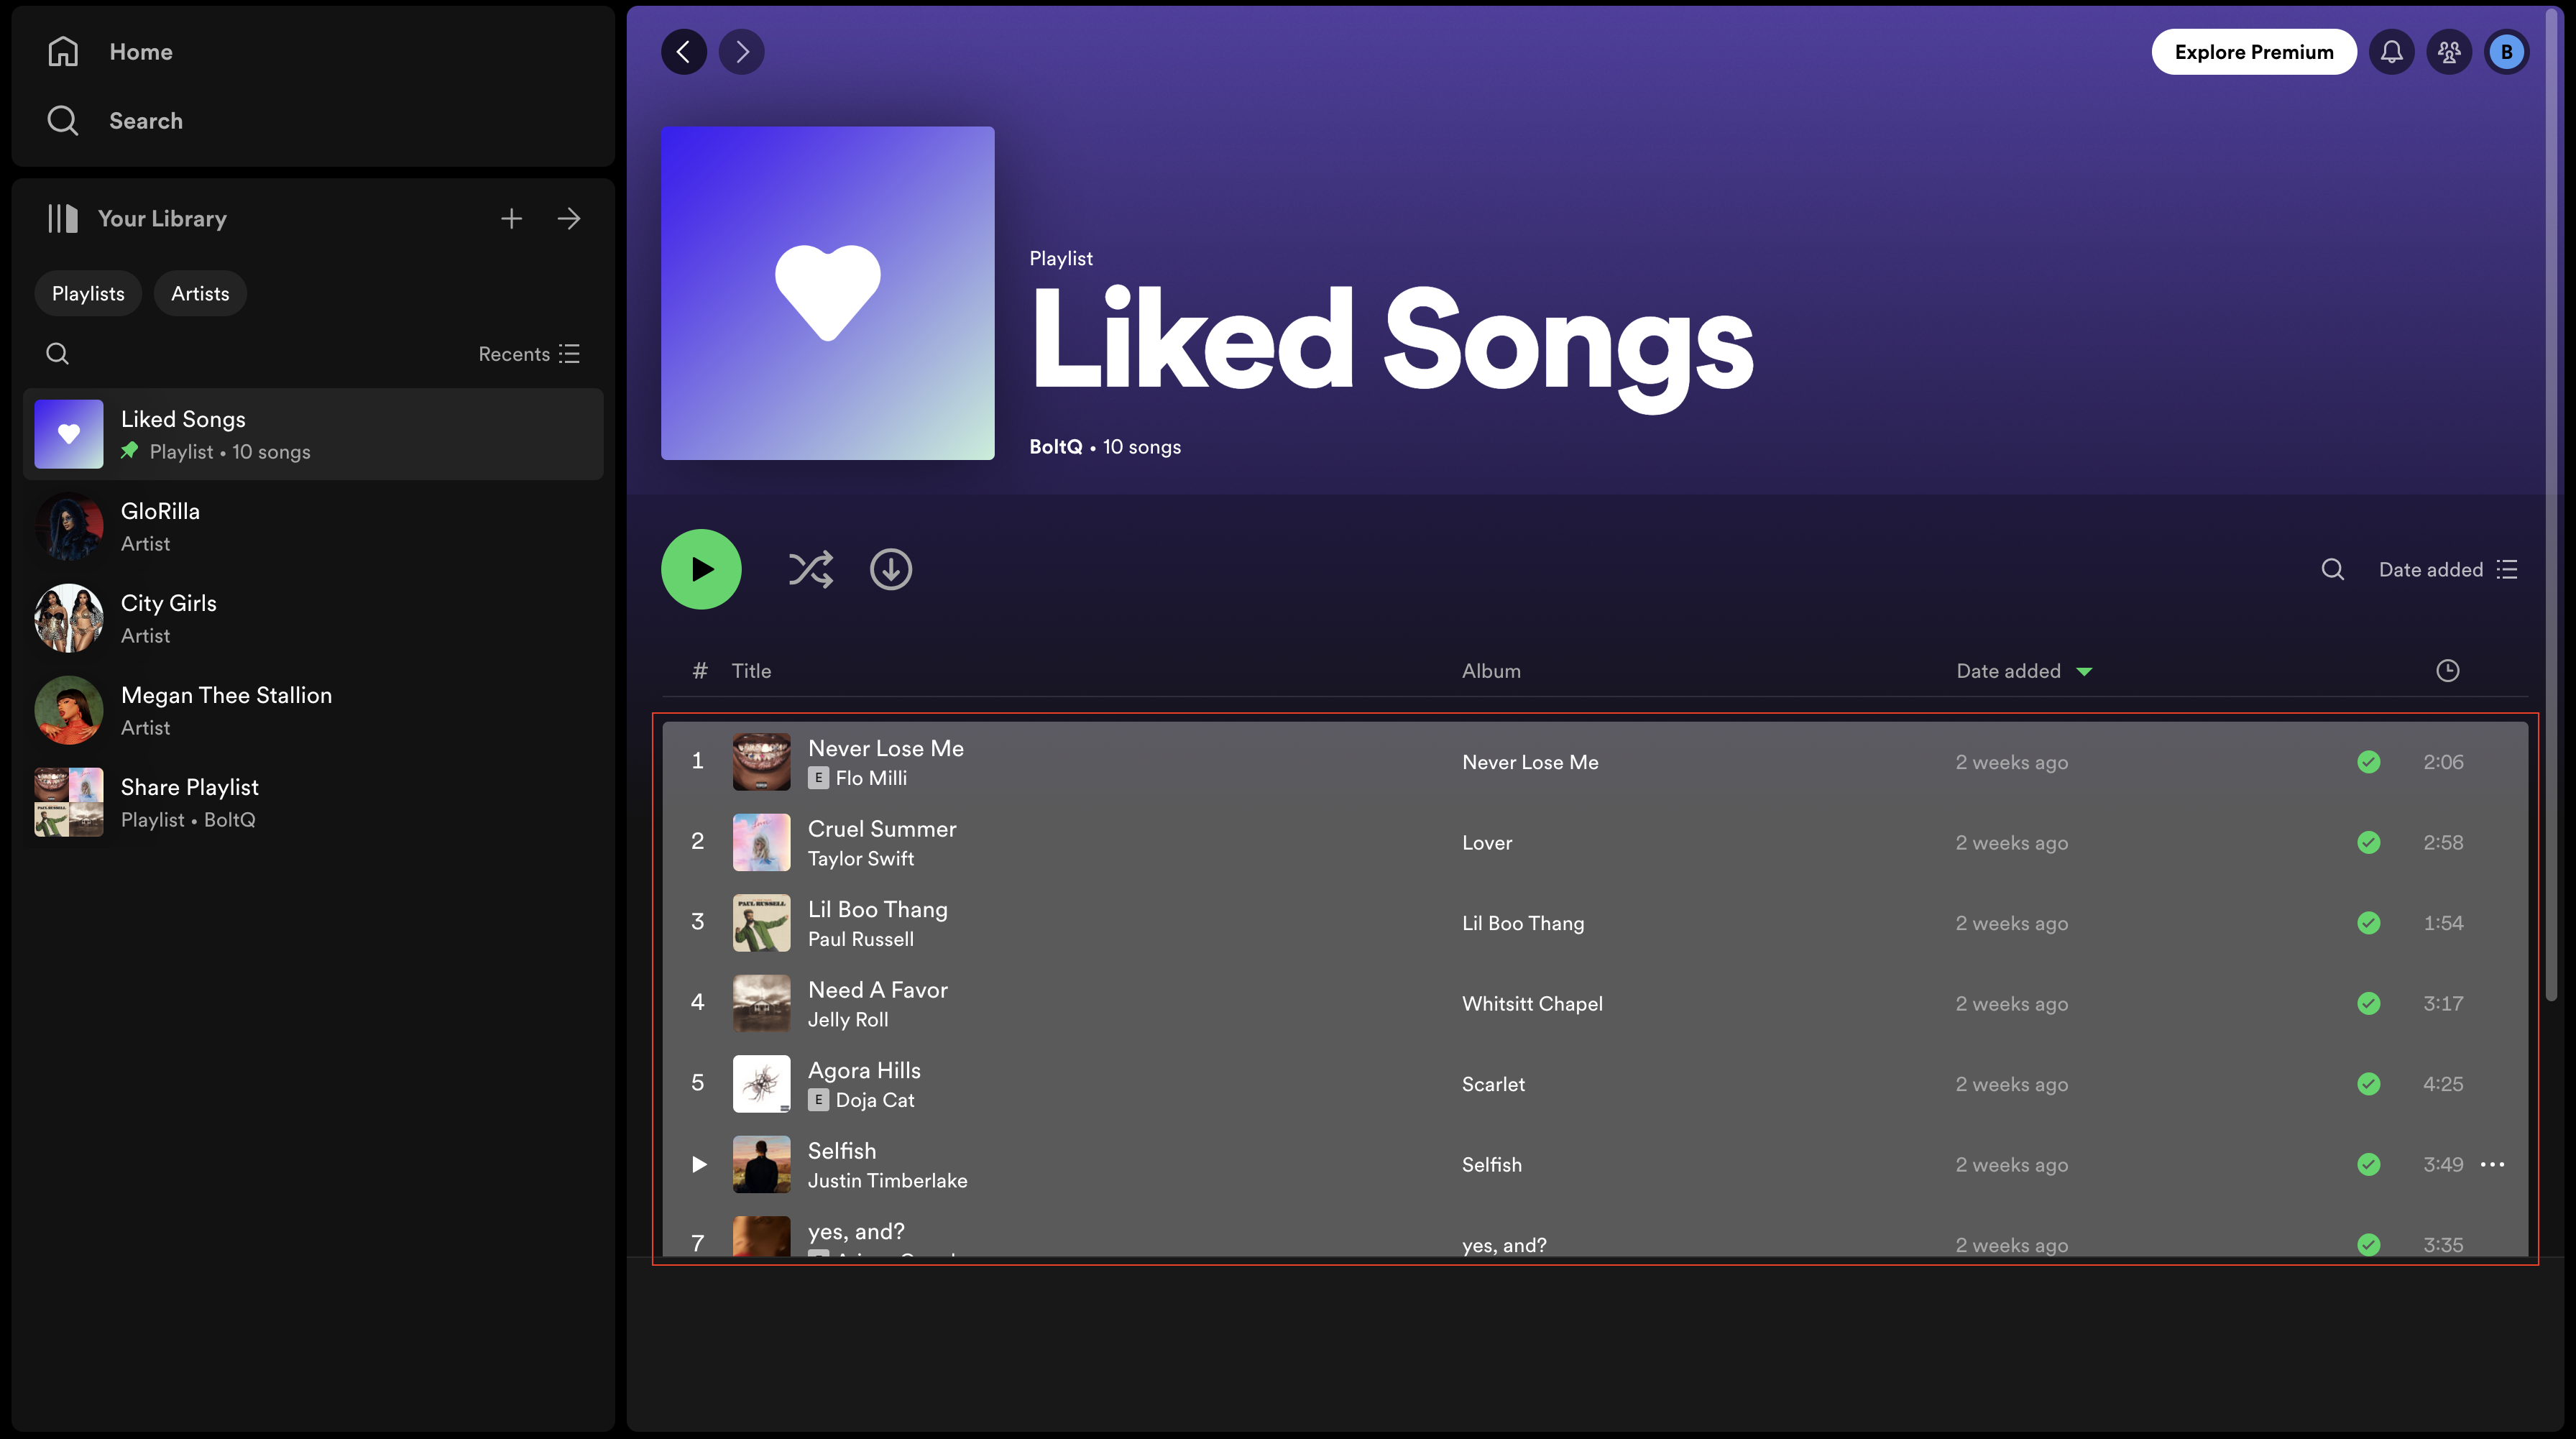 Select All Songs Using Ctrl + A